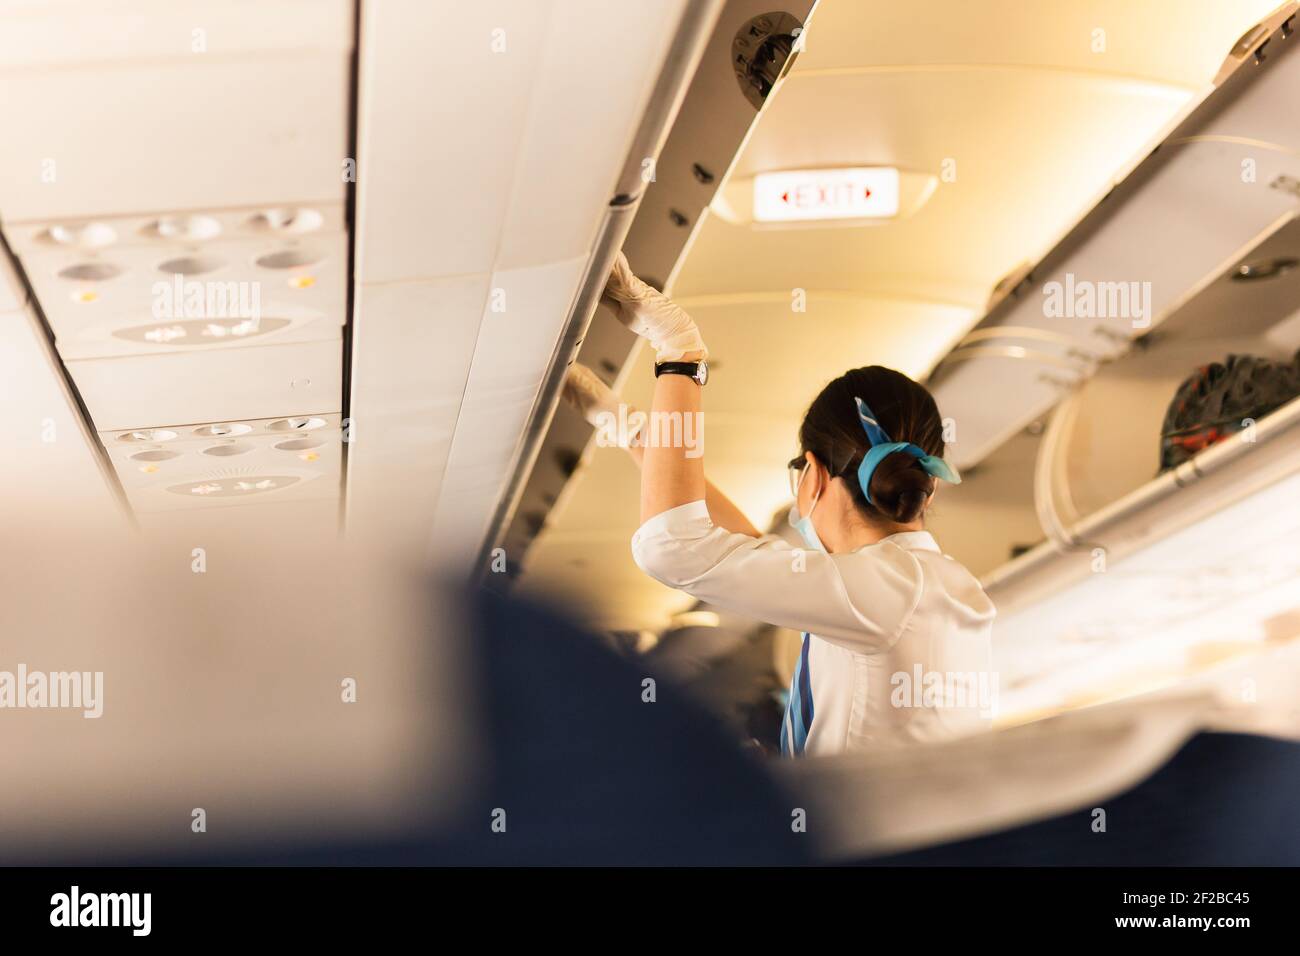 Flight attendant in protective masks and glove closing overhead compartment. Stock Photo